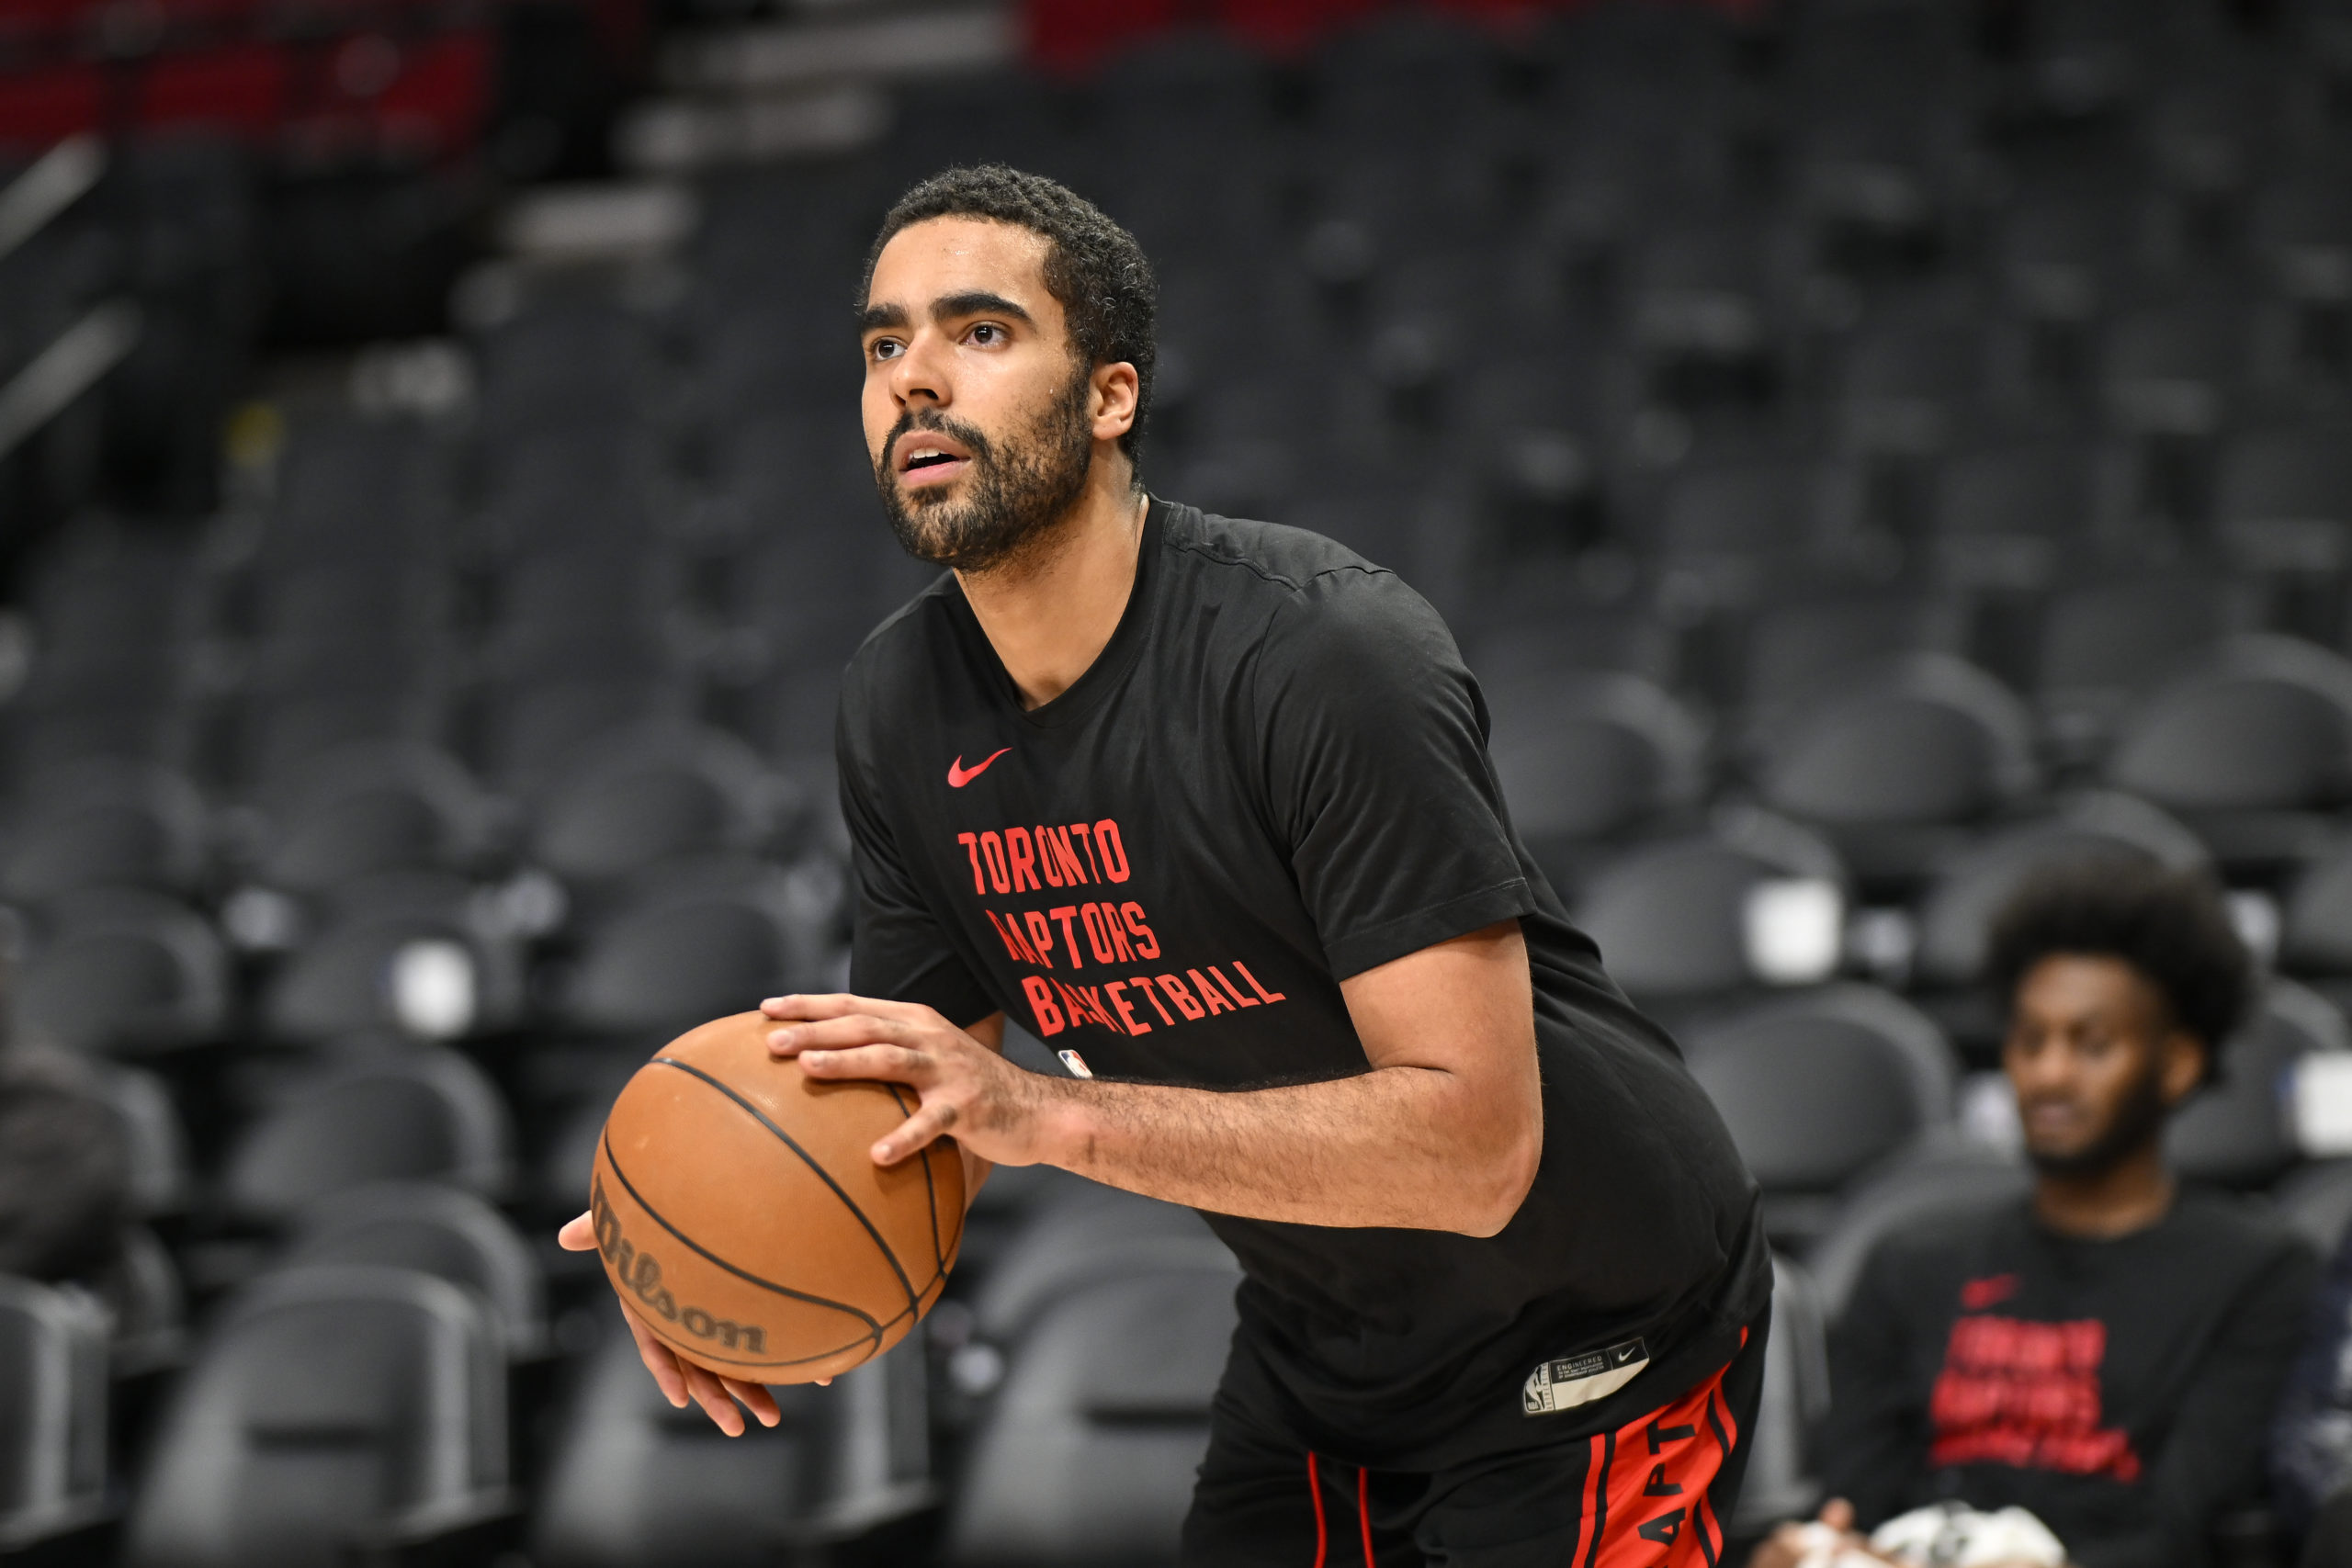 PORTLAND, OREGON - MARCH 09: Jontay Porter #34 of the Toronto Raptors warms up before the game against the Portland Trail Blazers at the Moda Center on March 09, 2024 in Portland, Oregon. NOTE TO USER: User expressly acknowledges and agrees that, by downloading and or using this photograph, User is consenting to the terms and conditions of the Getty Images License Agreement. (Photo by Alika Jenner/Getty Images)